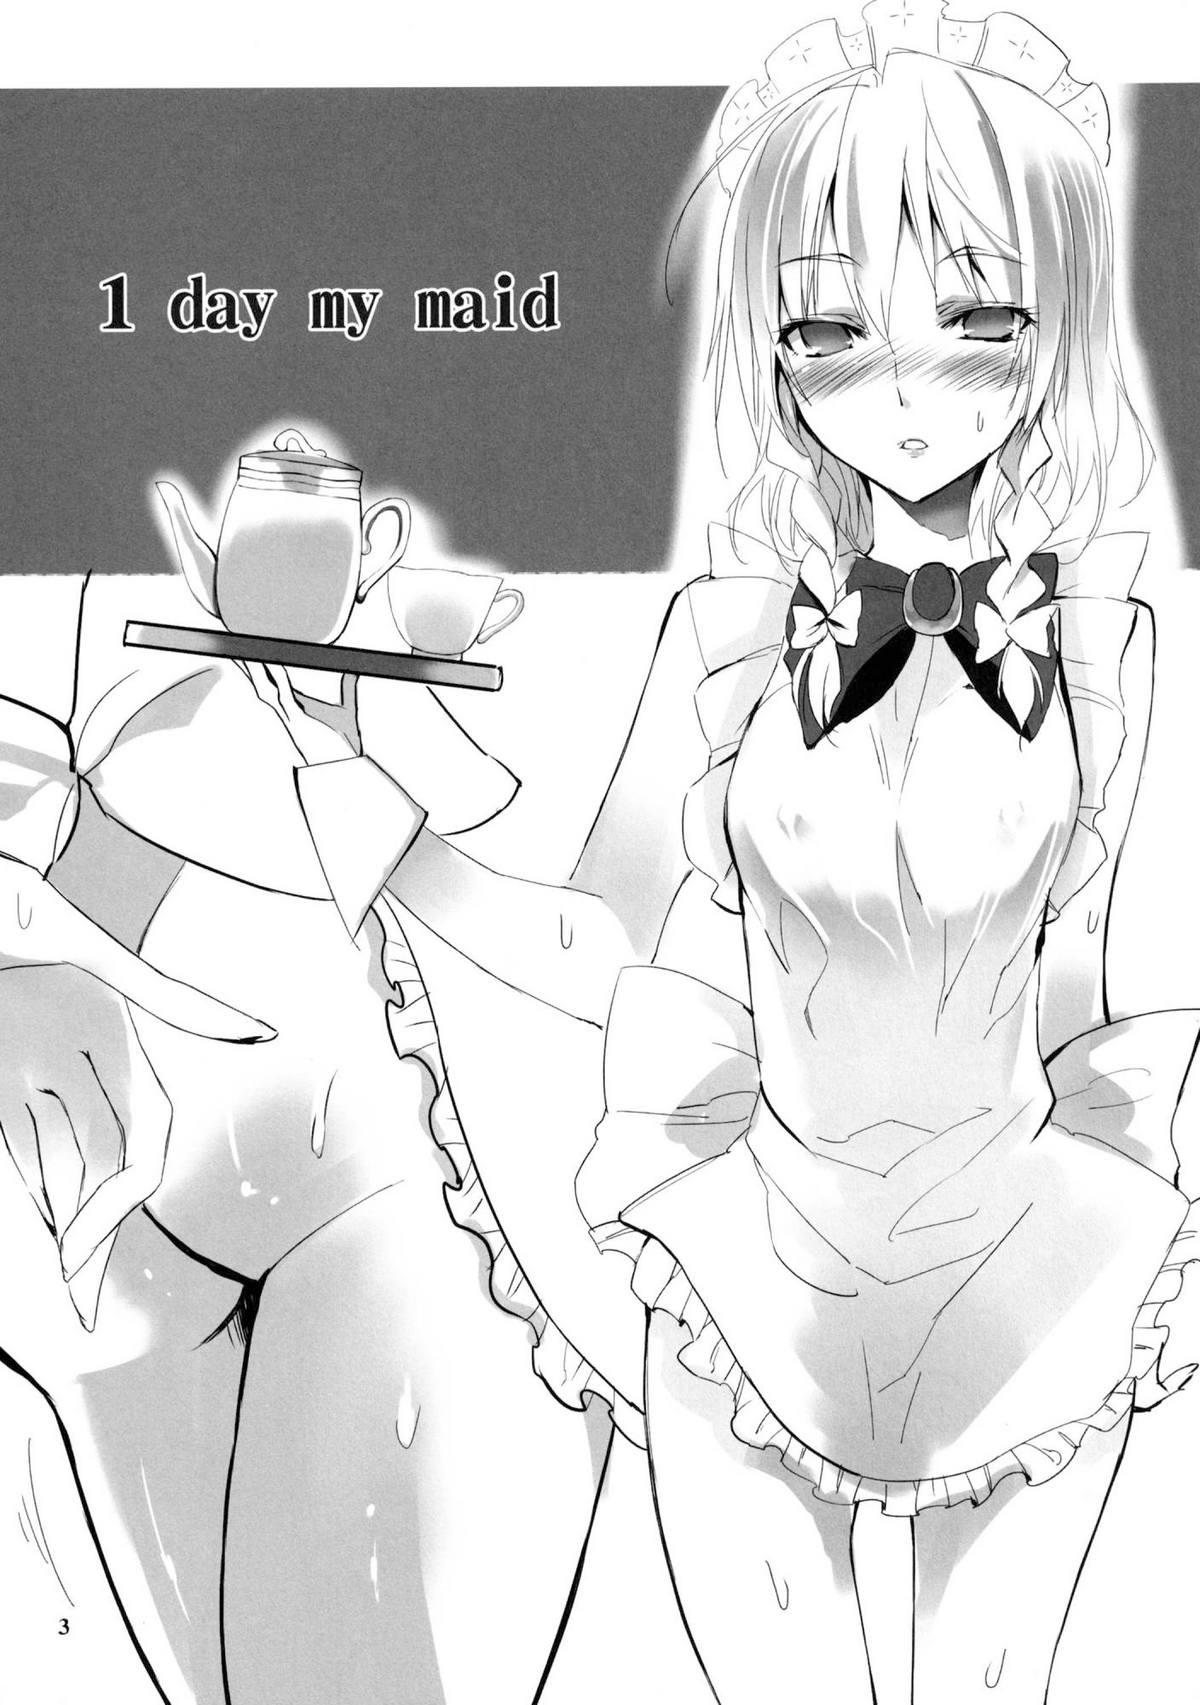 Gemendo 1 day my maid - Touhou project Class Room - Page 3